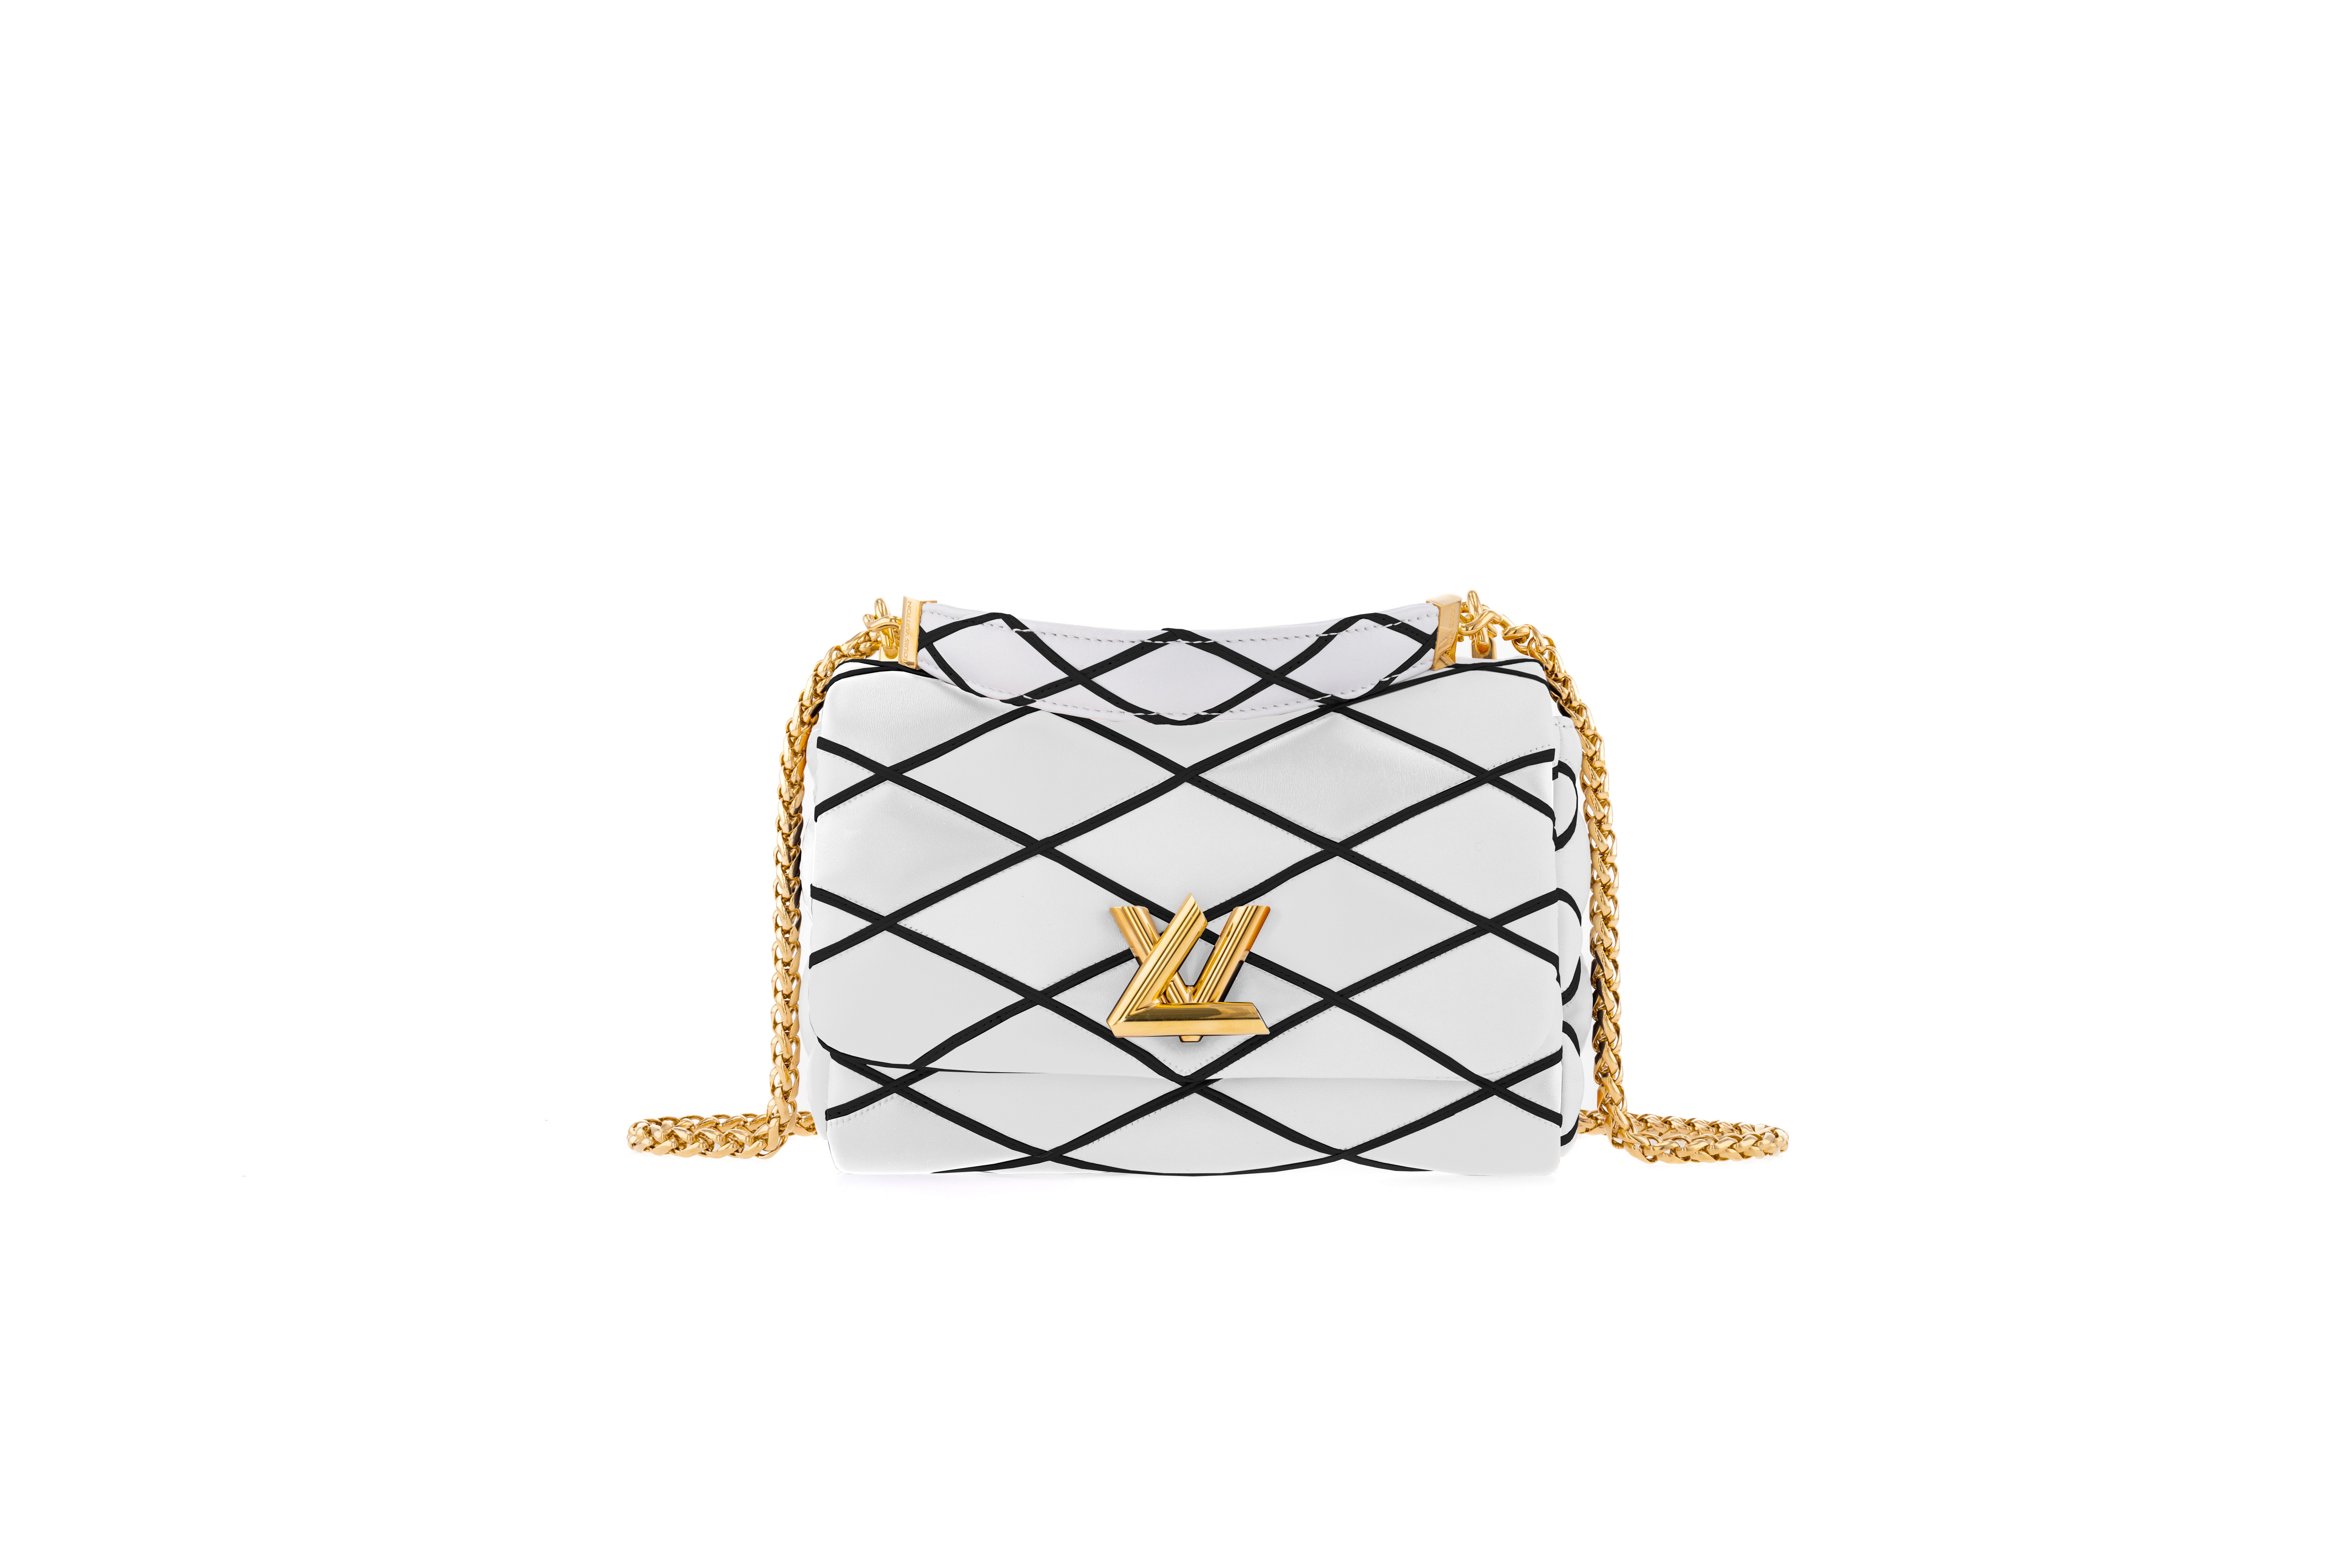 Louis Vuitton Debuted A New Take On Its losic Logo Handbag For